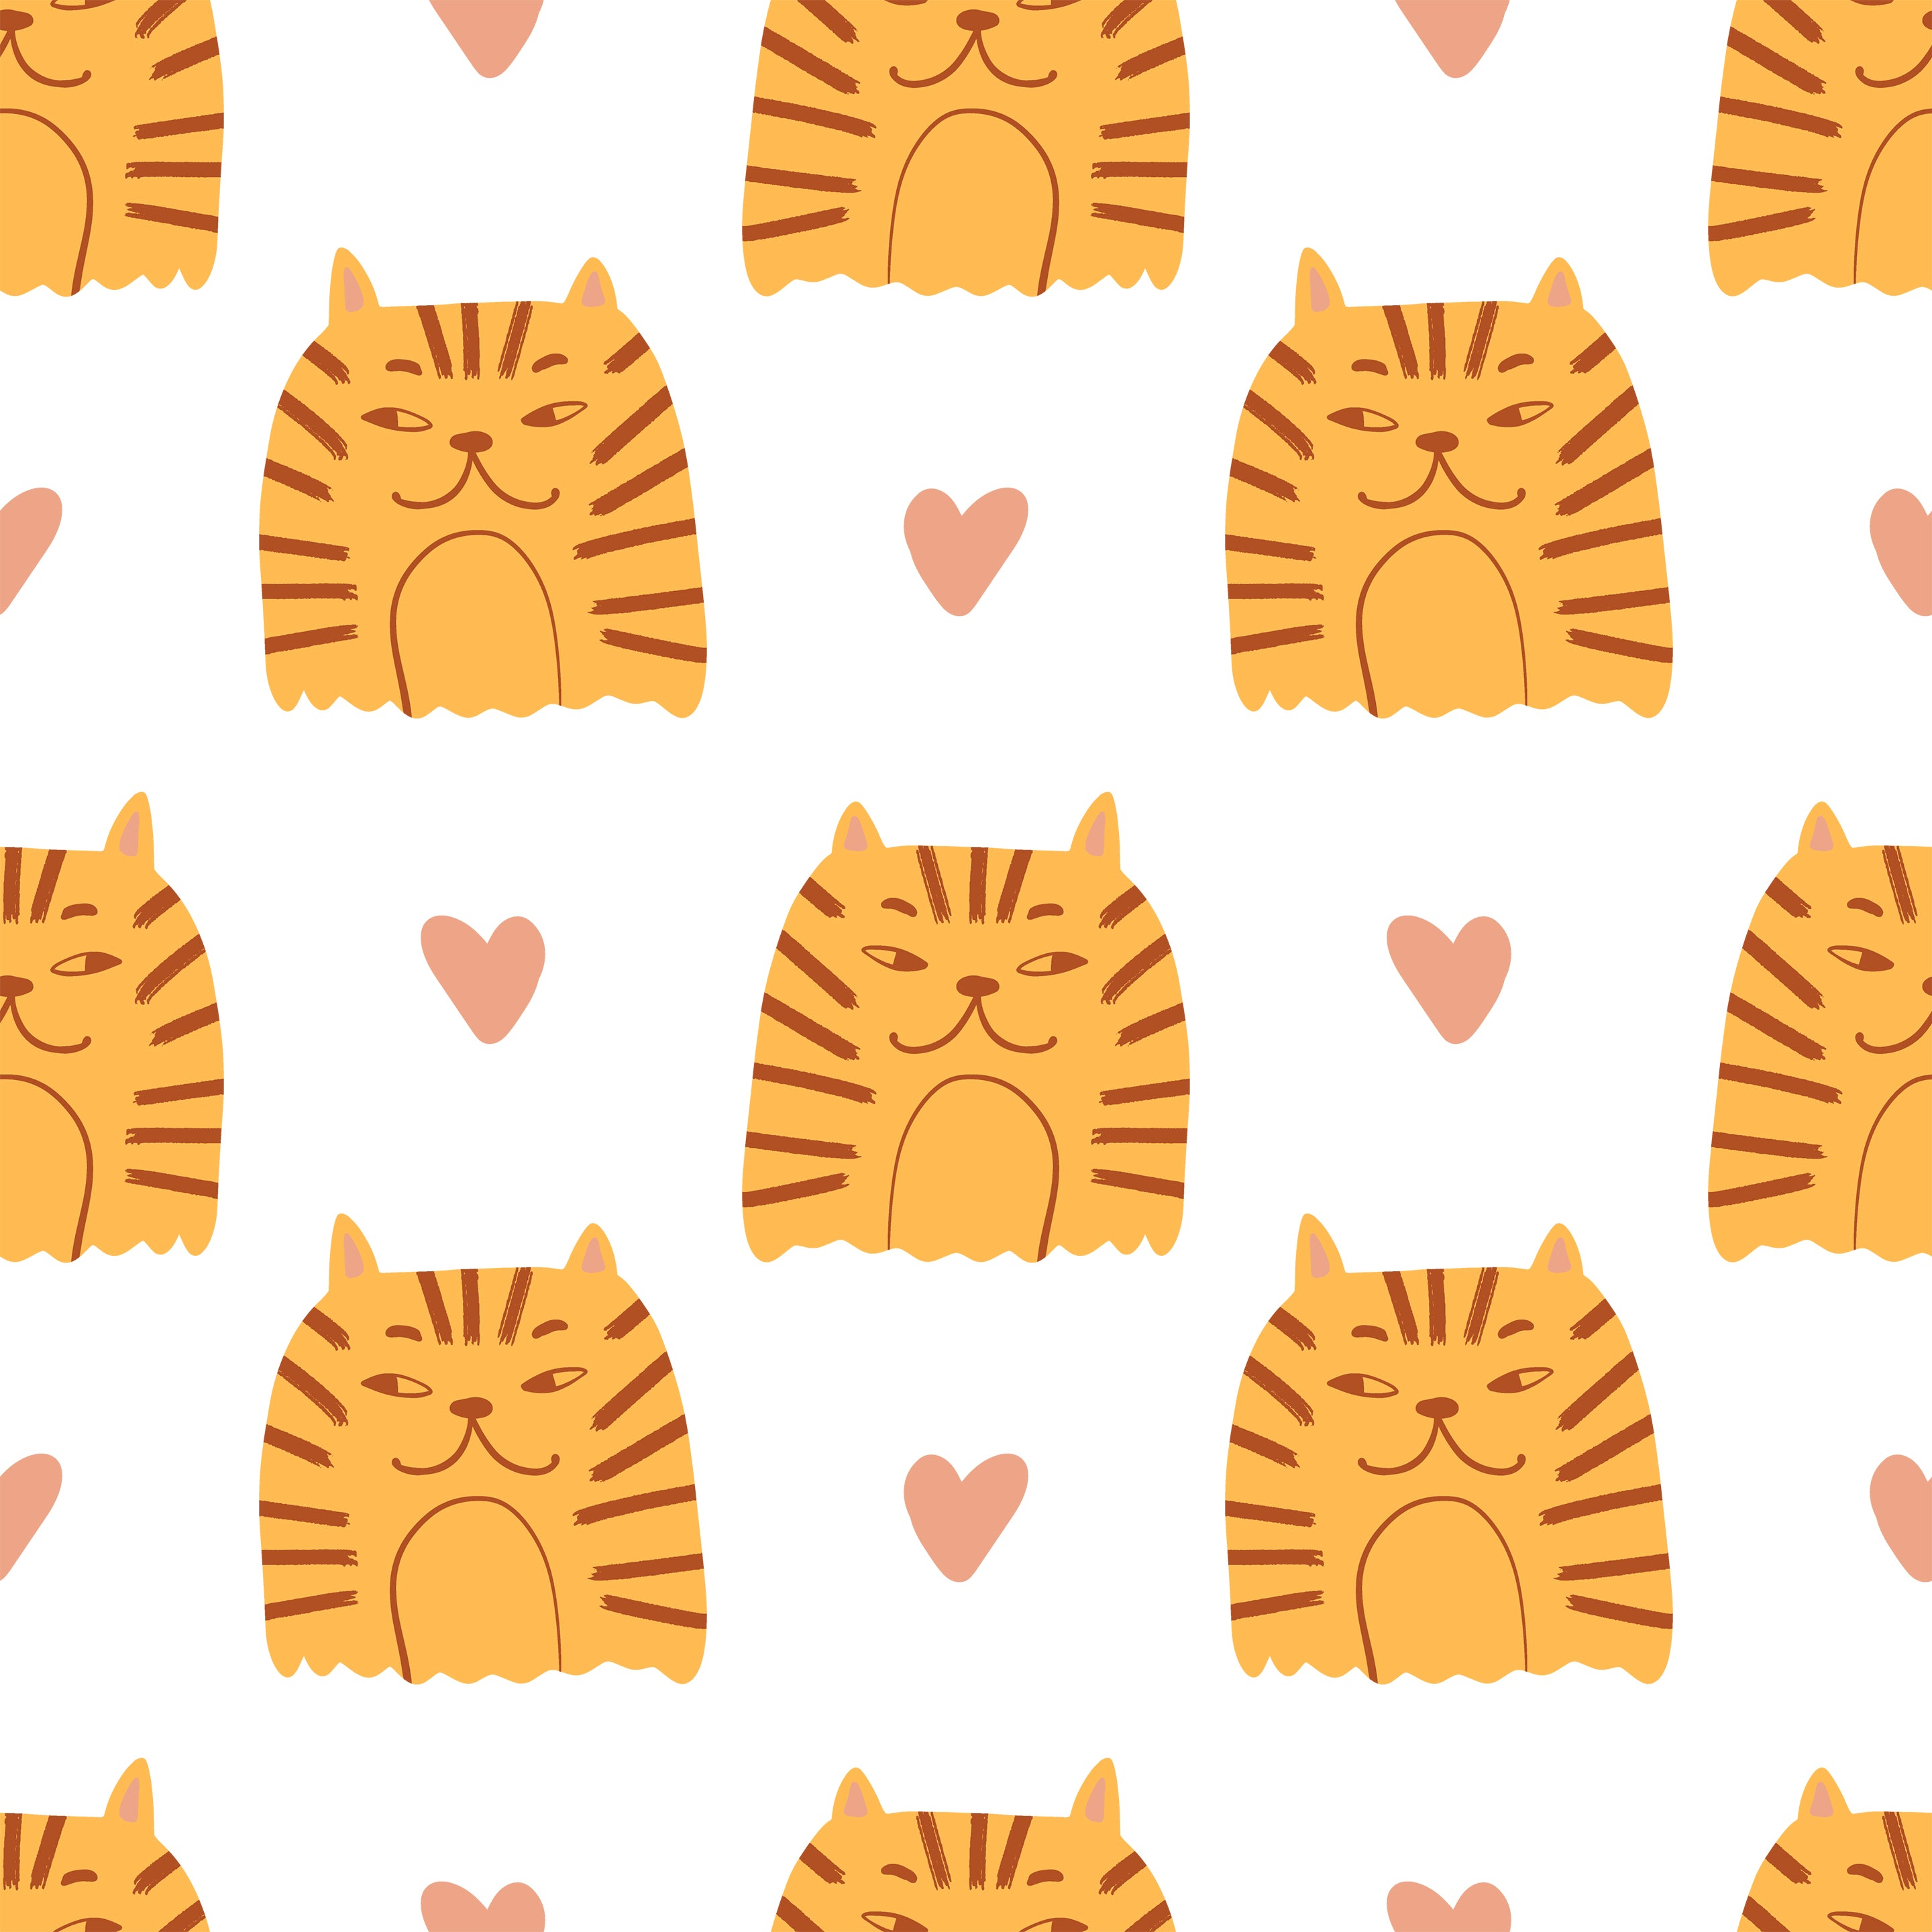 Adorable repeating pattern of striped orange tabby cats interspersed with pink hearts on a white background, designed for the 'Cat Wallpaper 9.' This playful wallpaper pattern is ideal for a fun and loving atmosphere in children's rooms or casual spaces.